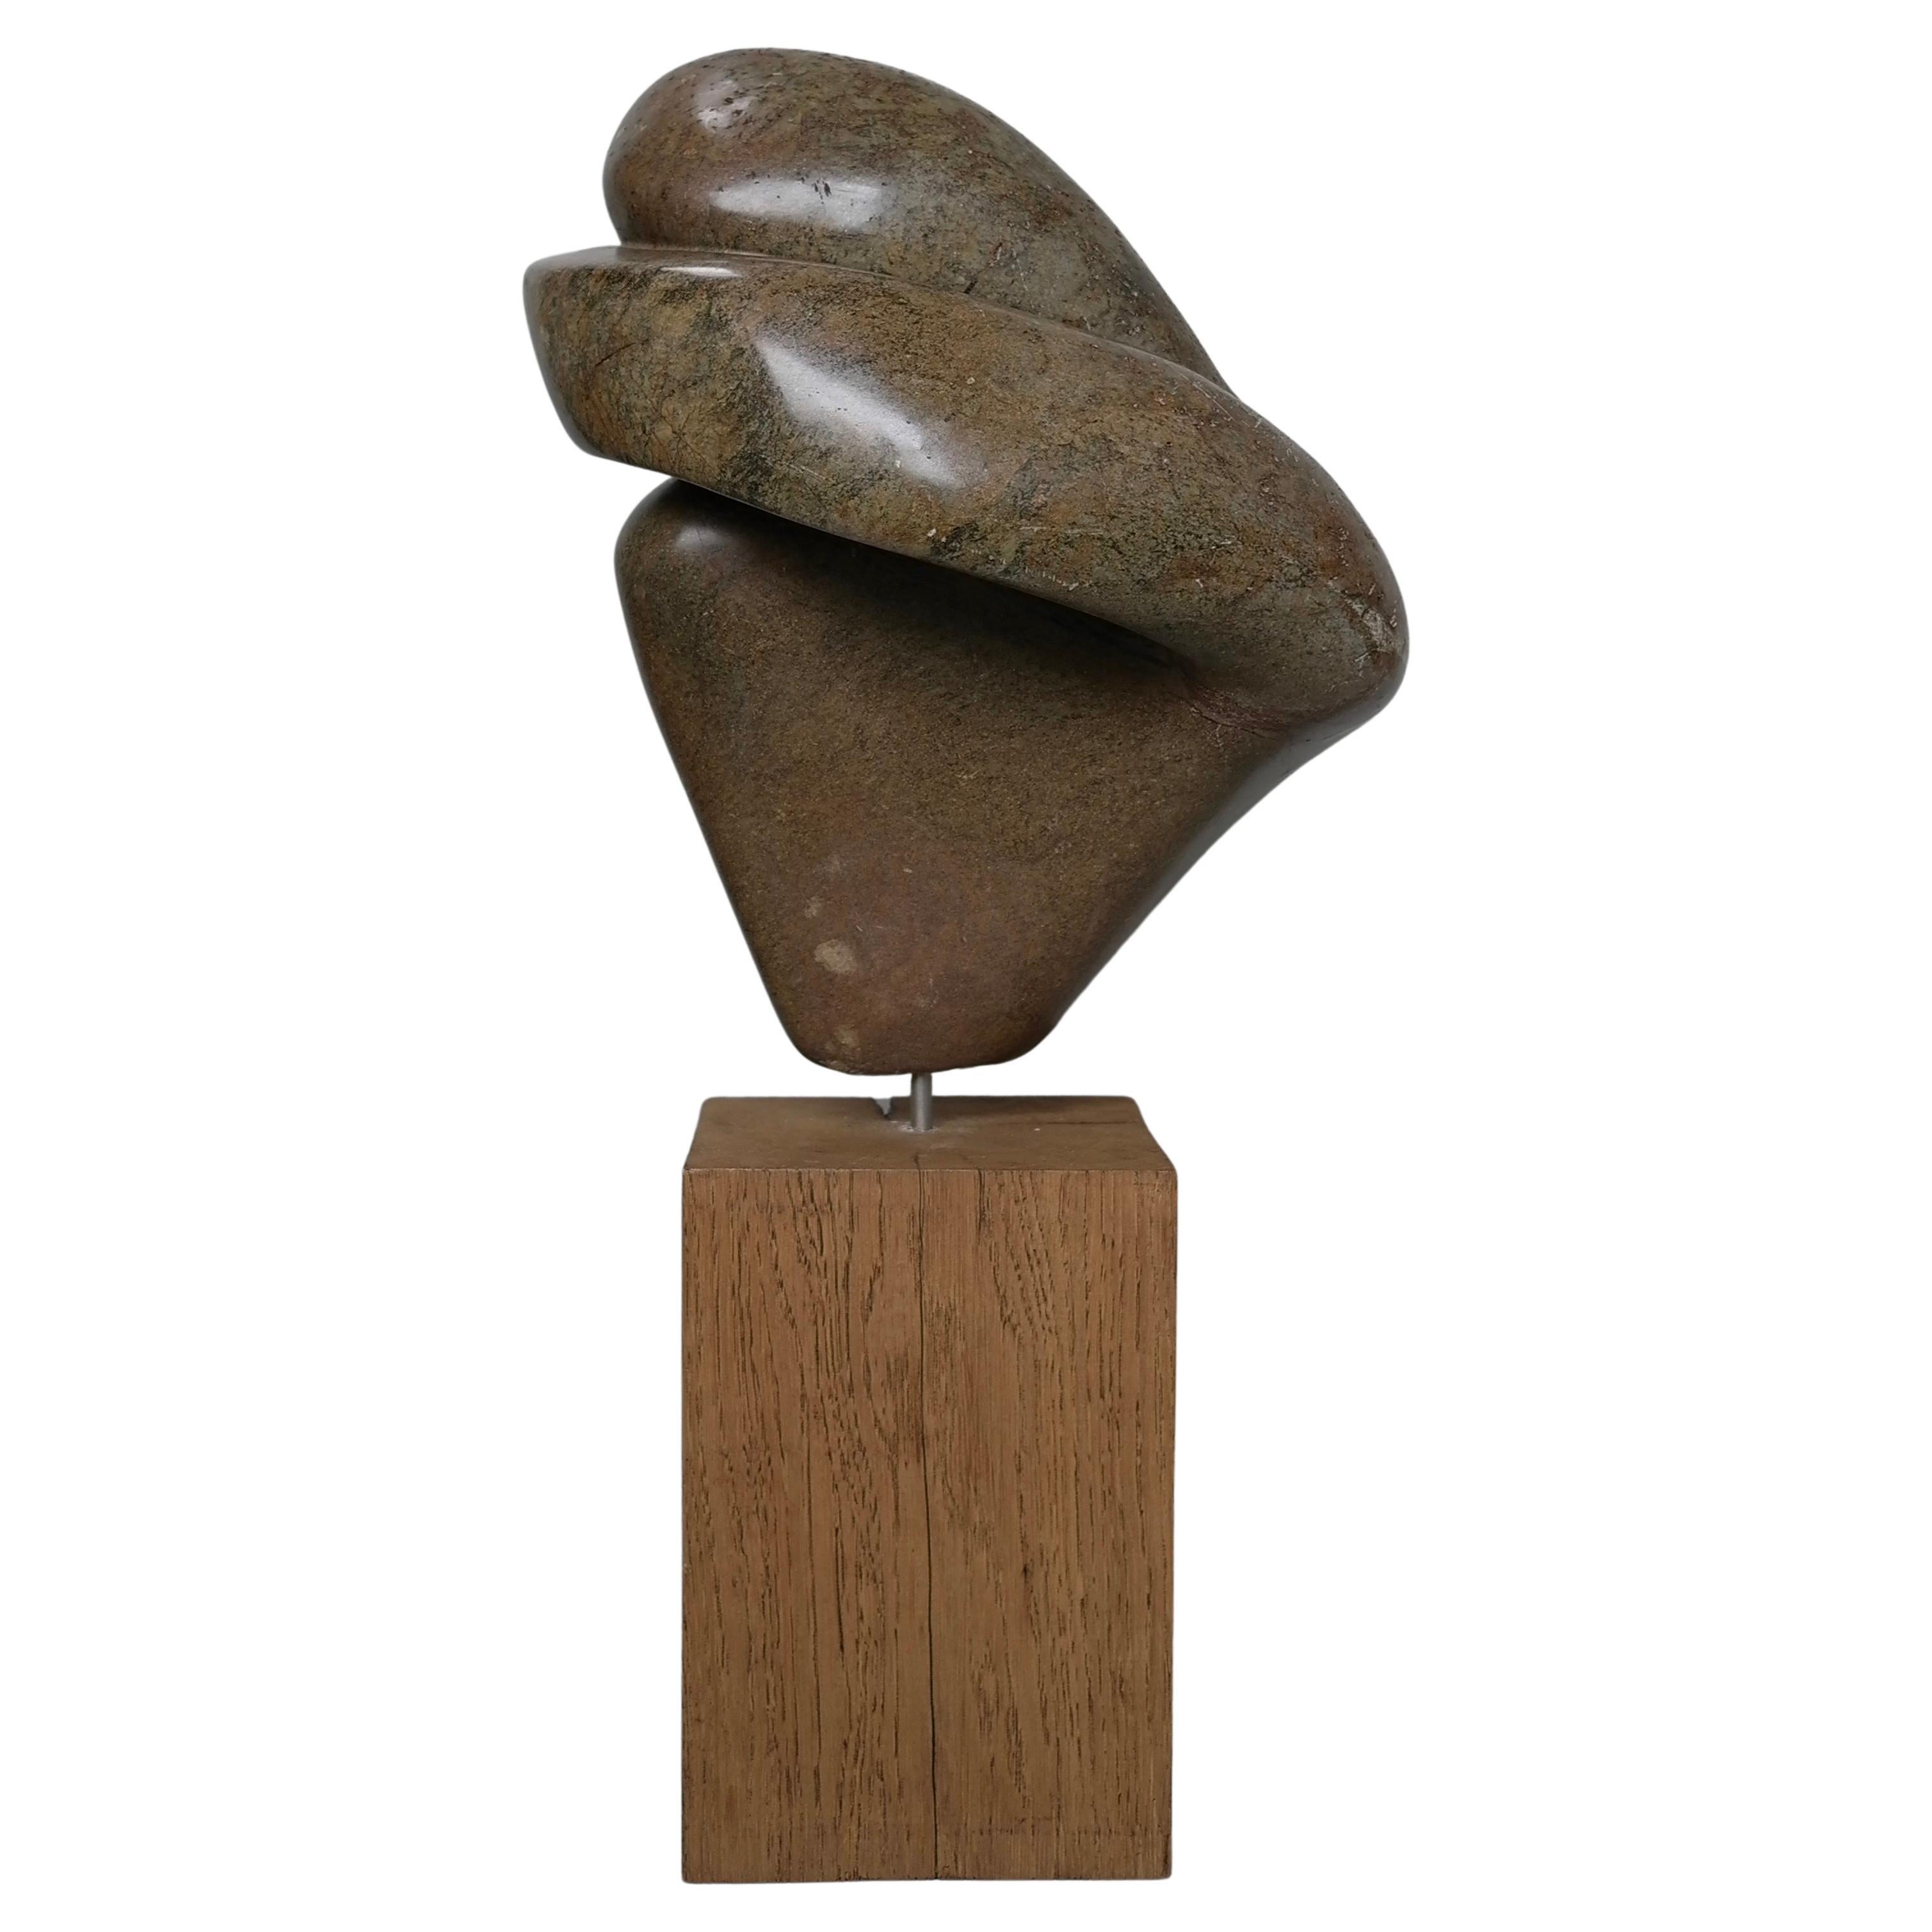 Organic Green and Brown Steatite Stone Abstract Sculpture, The Netherlands 1970